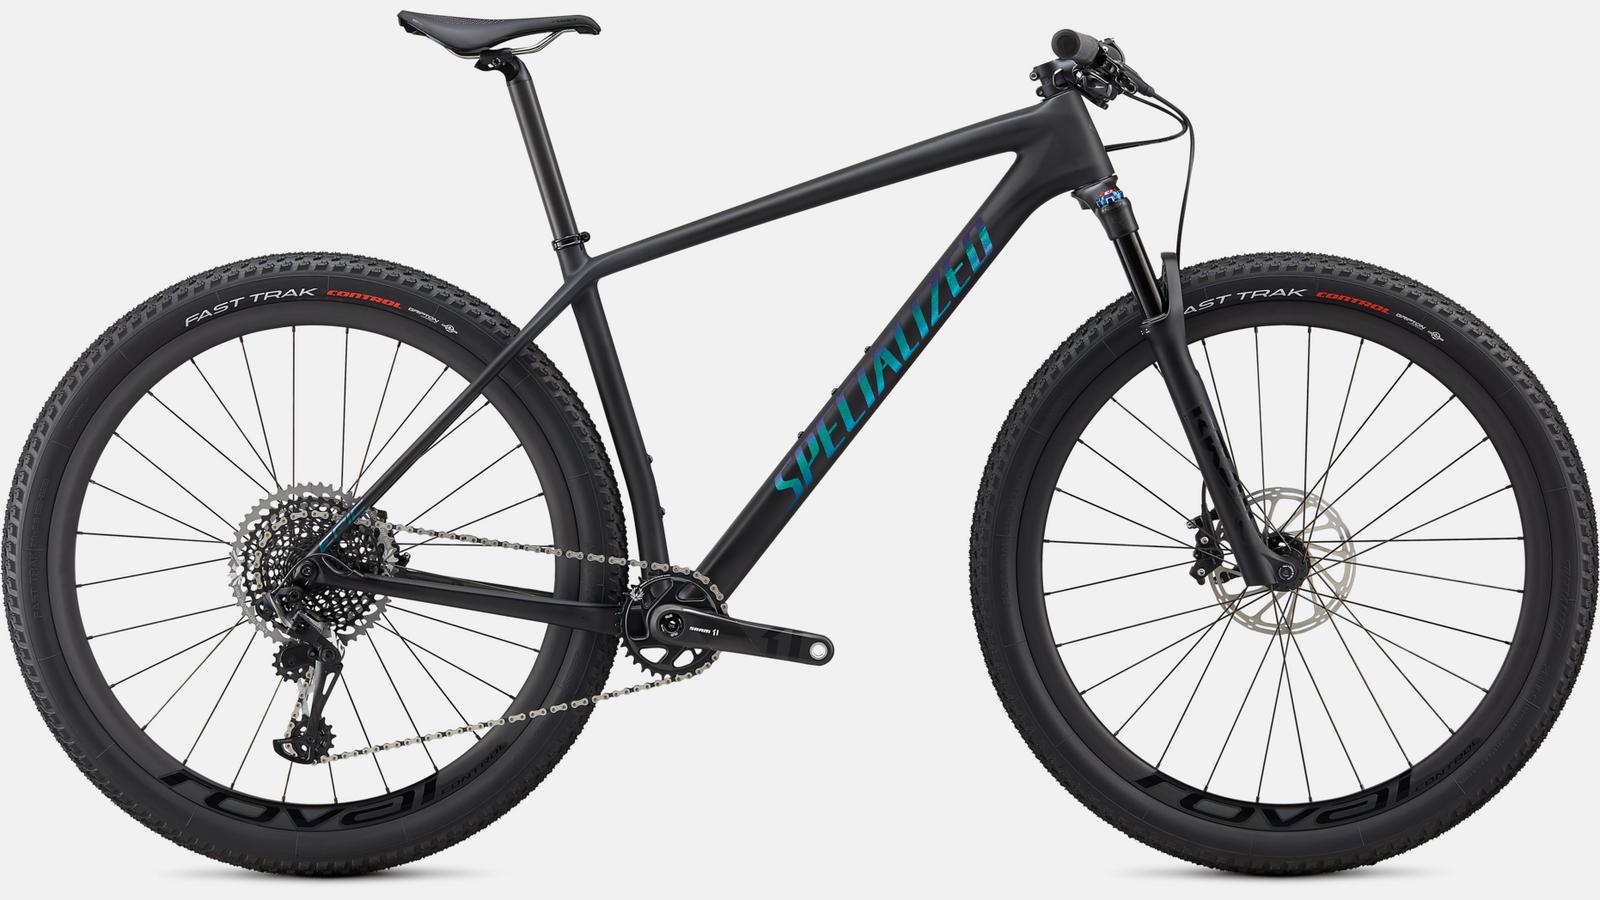 Paint for 2020 Specialized Epic Hardtail Pro - Satin Black